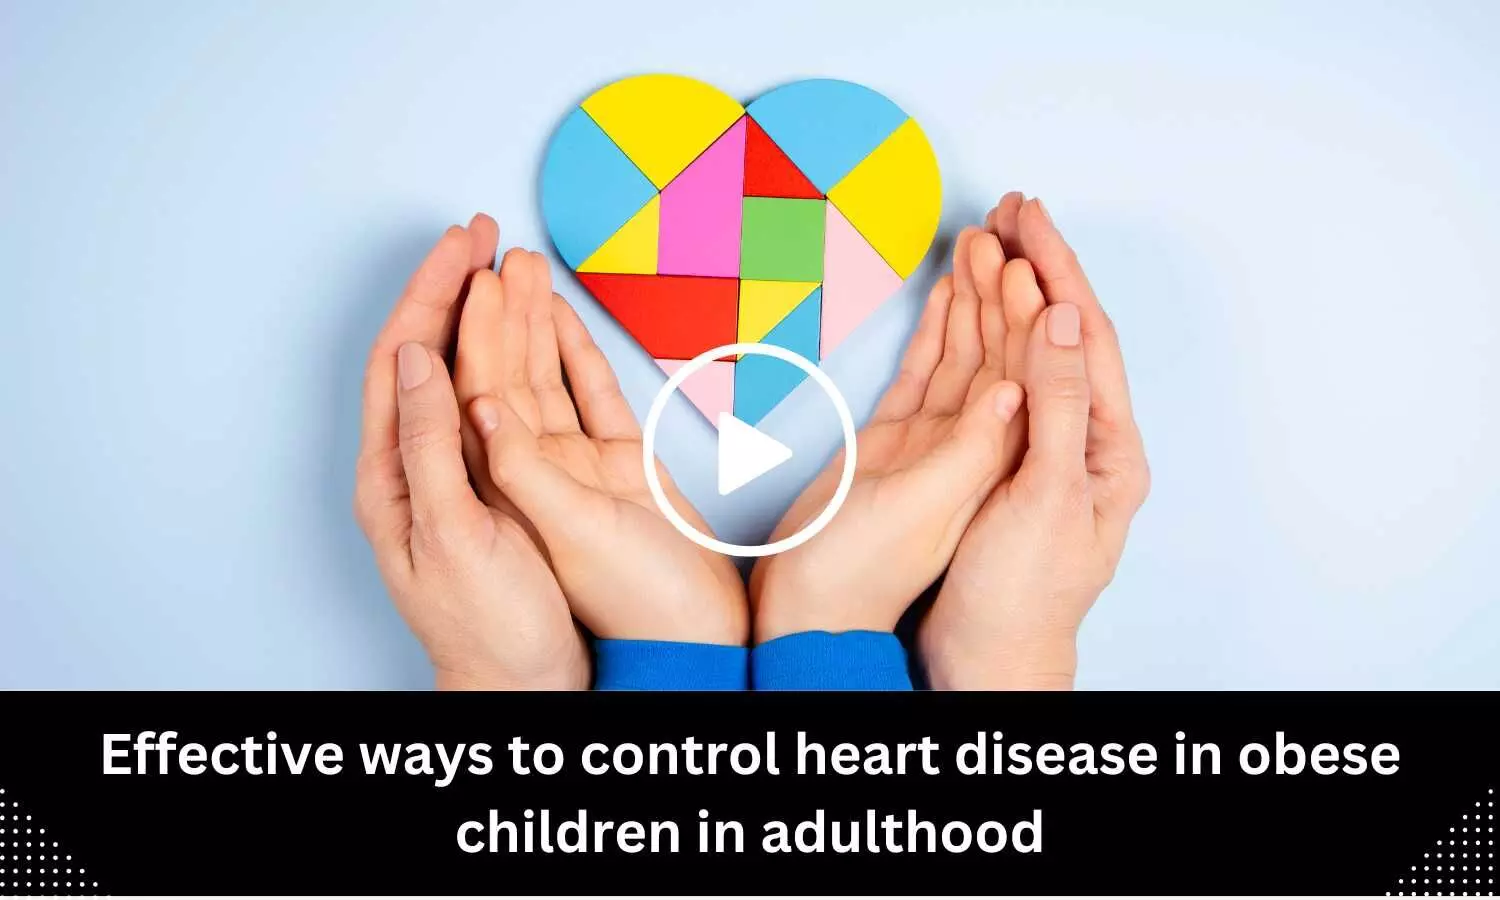 Effective ways to control heart disease in obese children in adulthood